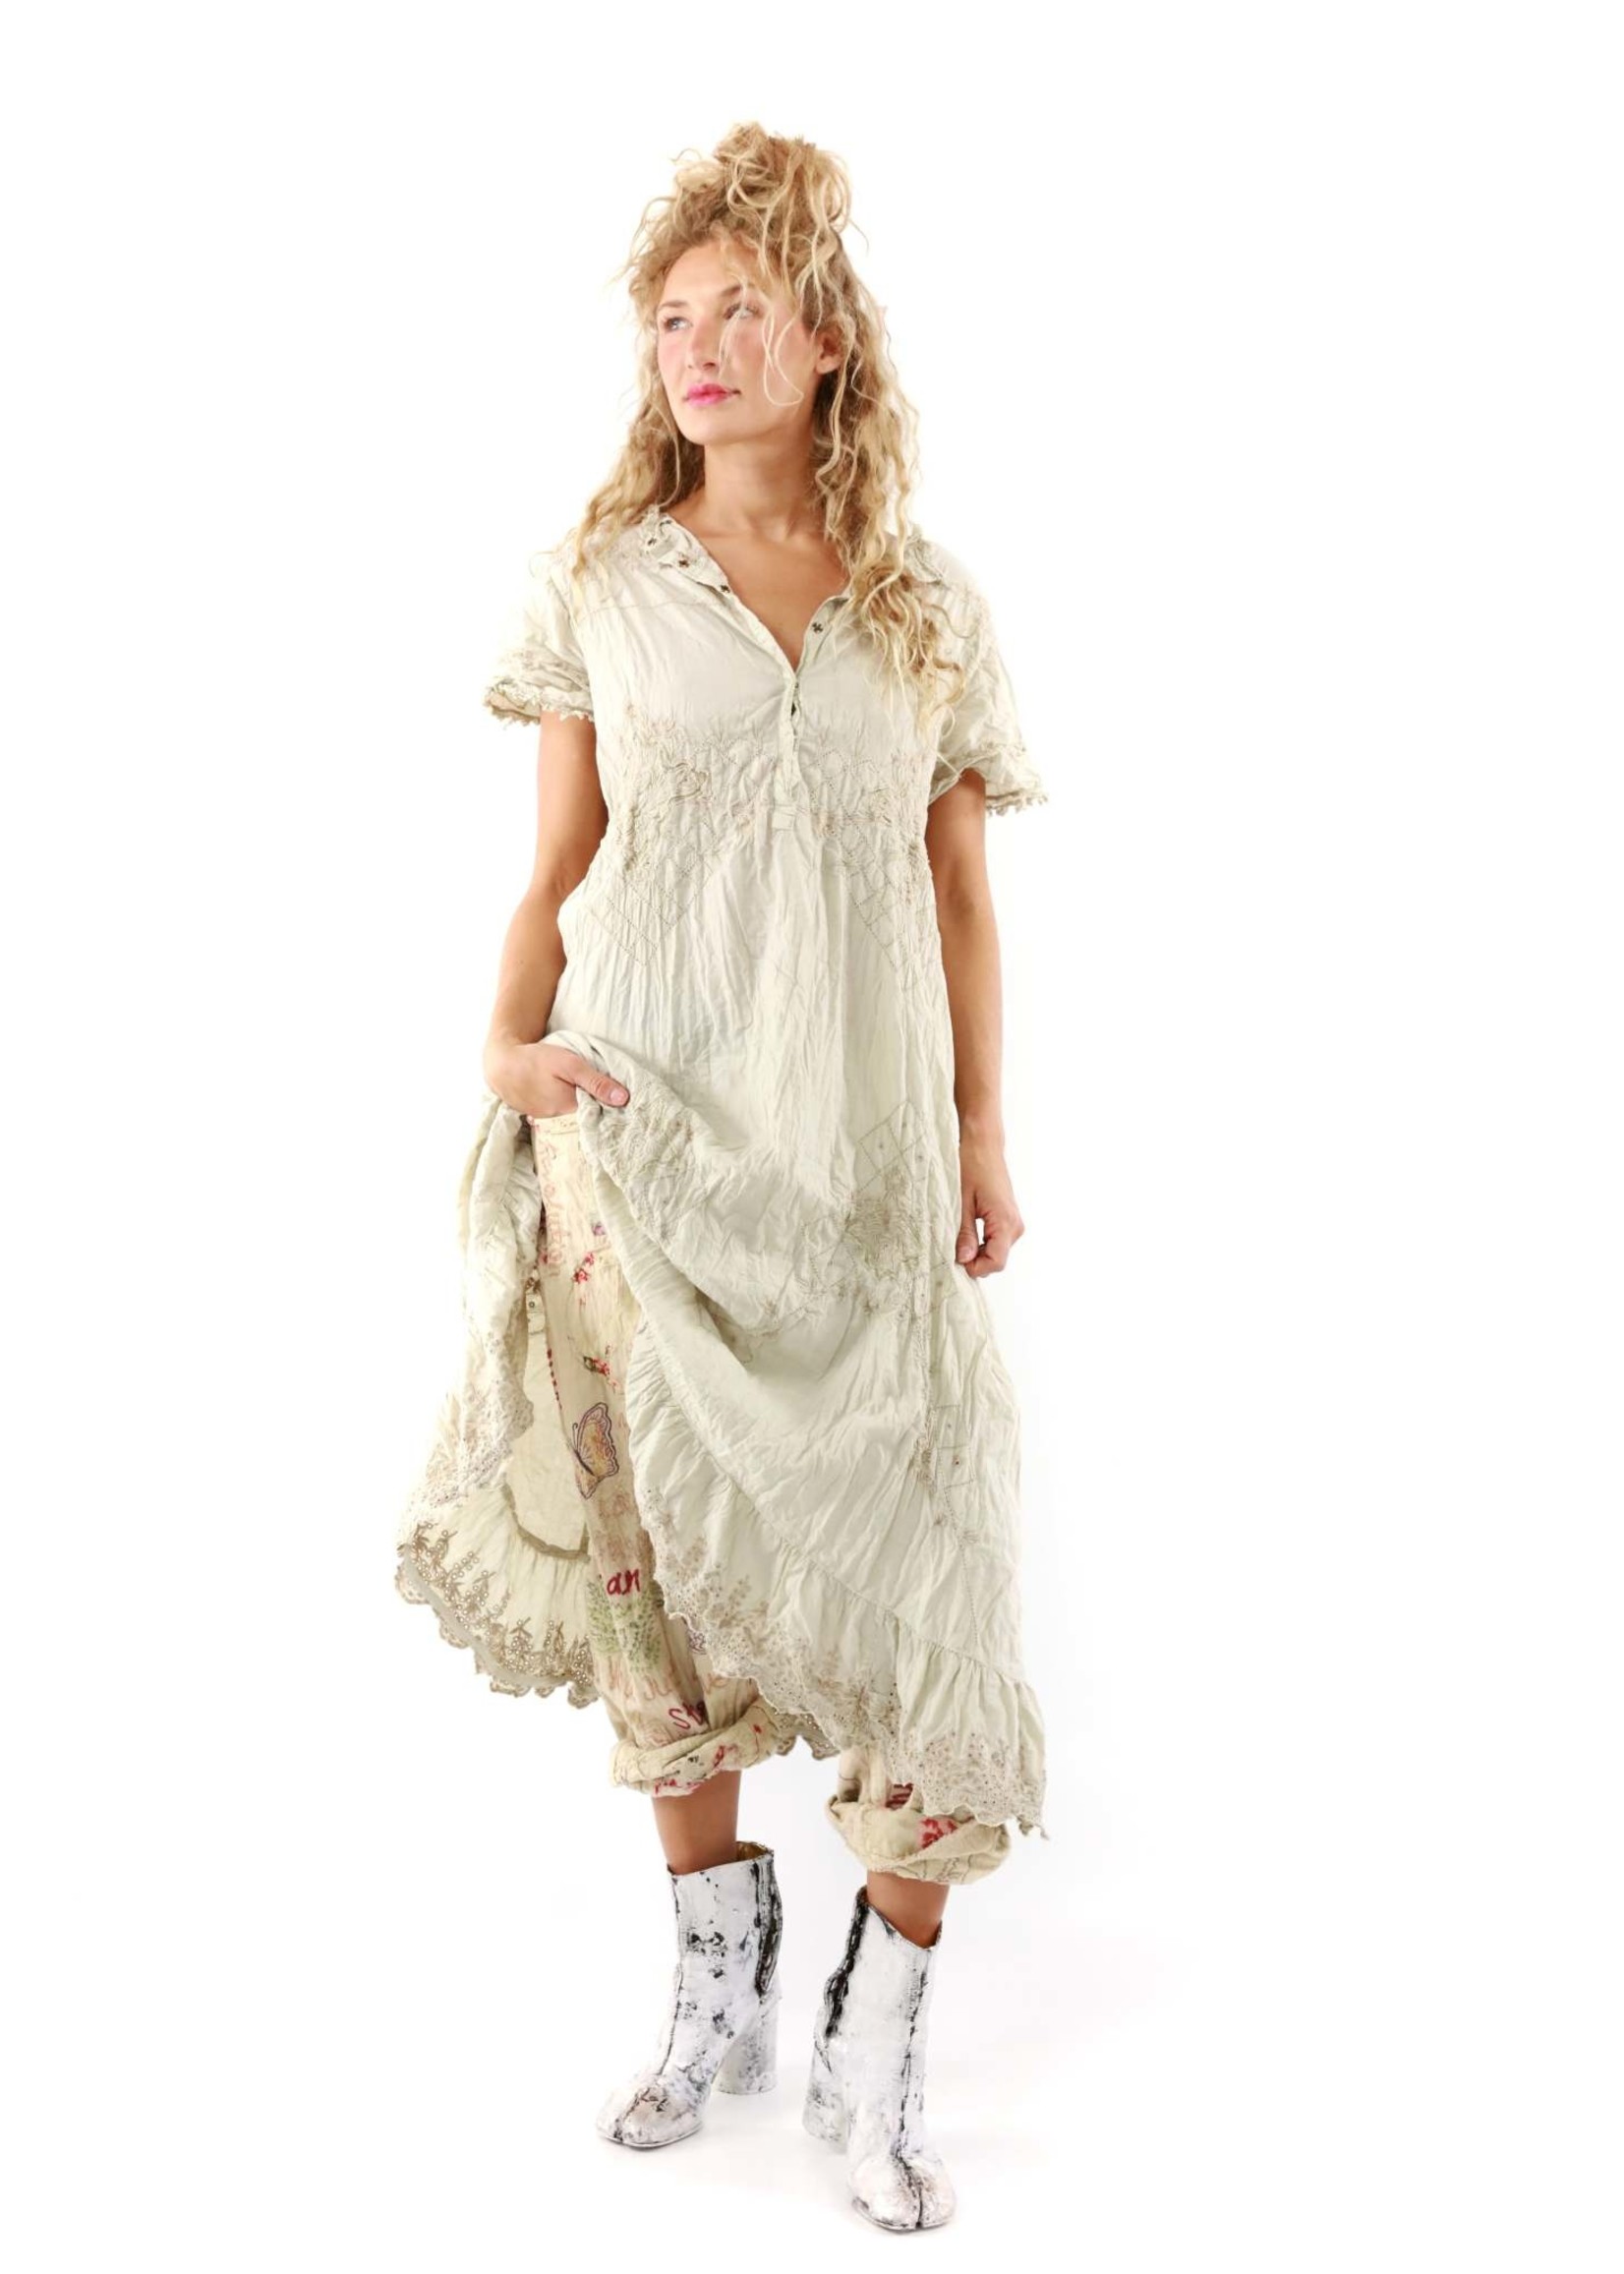 Magnolia Pearl Anna Grace Embroidered Dress (Moonlight) O/S